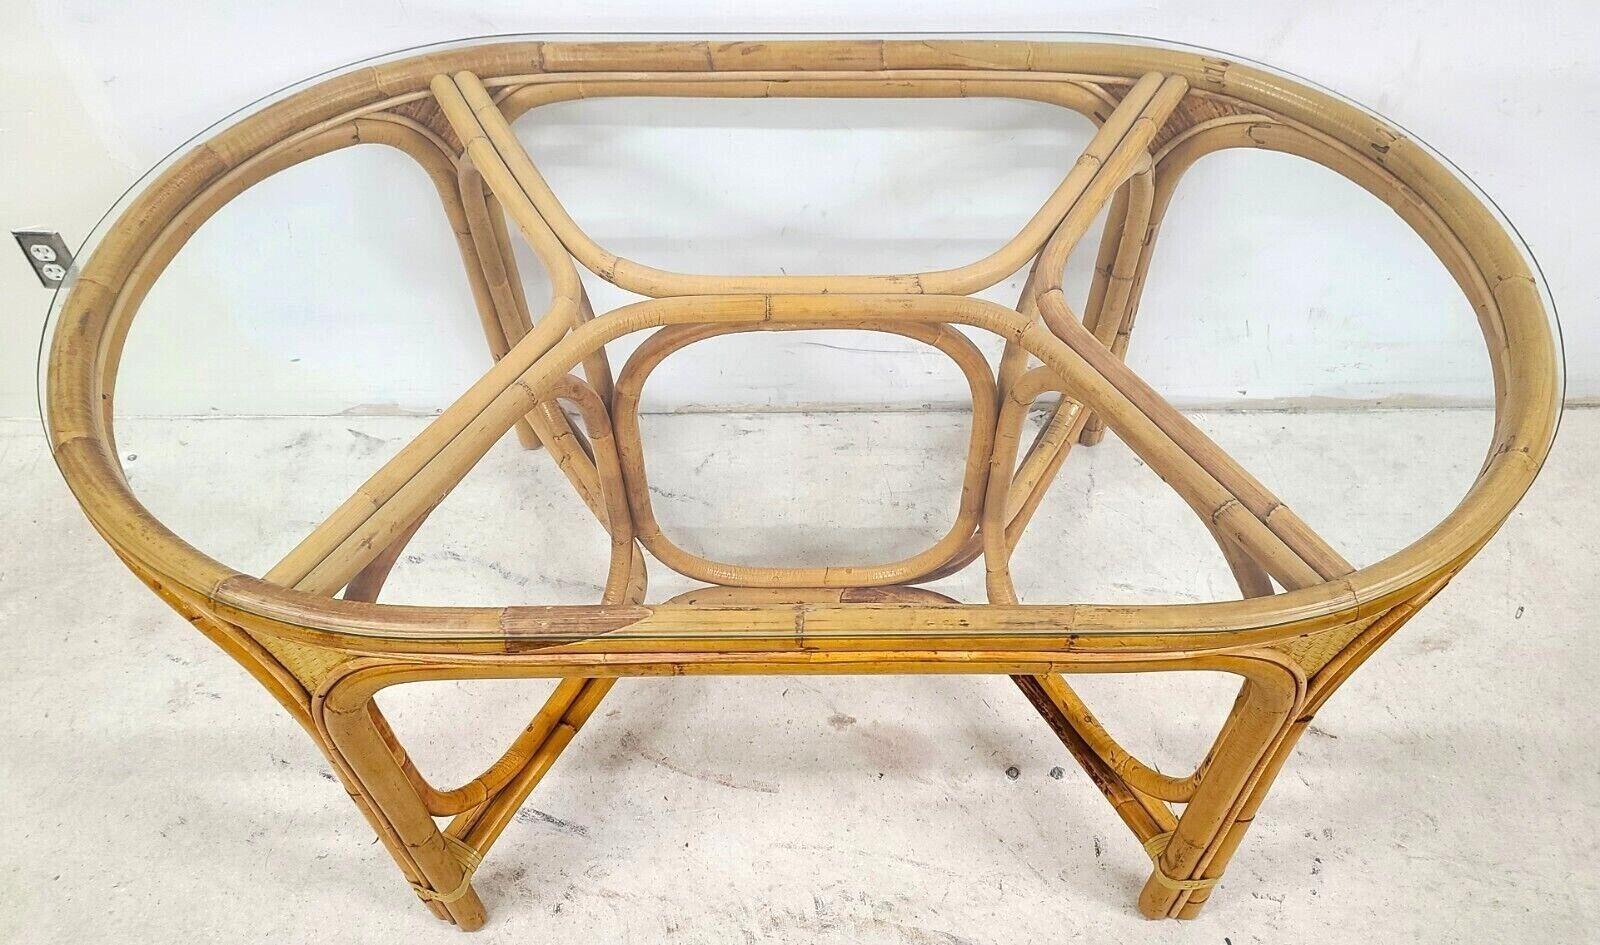 Vintage 1970s Bamboo Rattan Glass Oval Dining Table 1